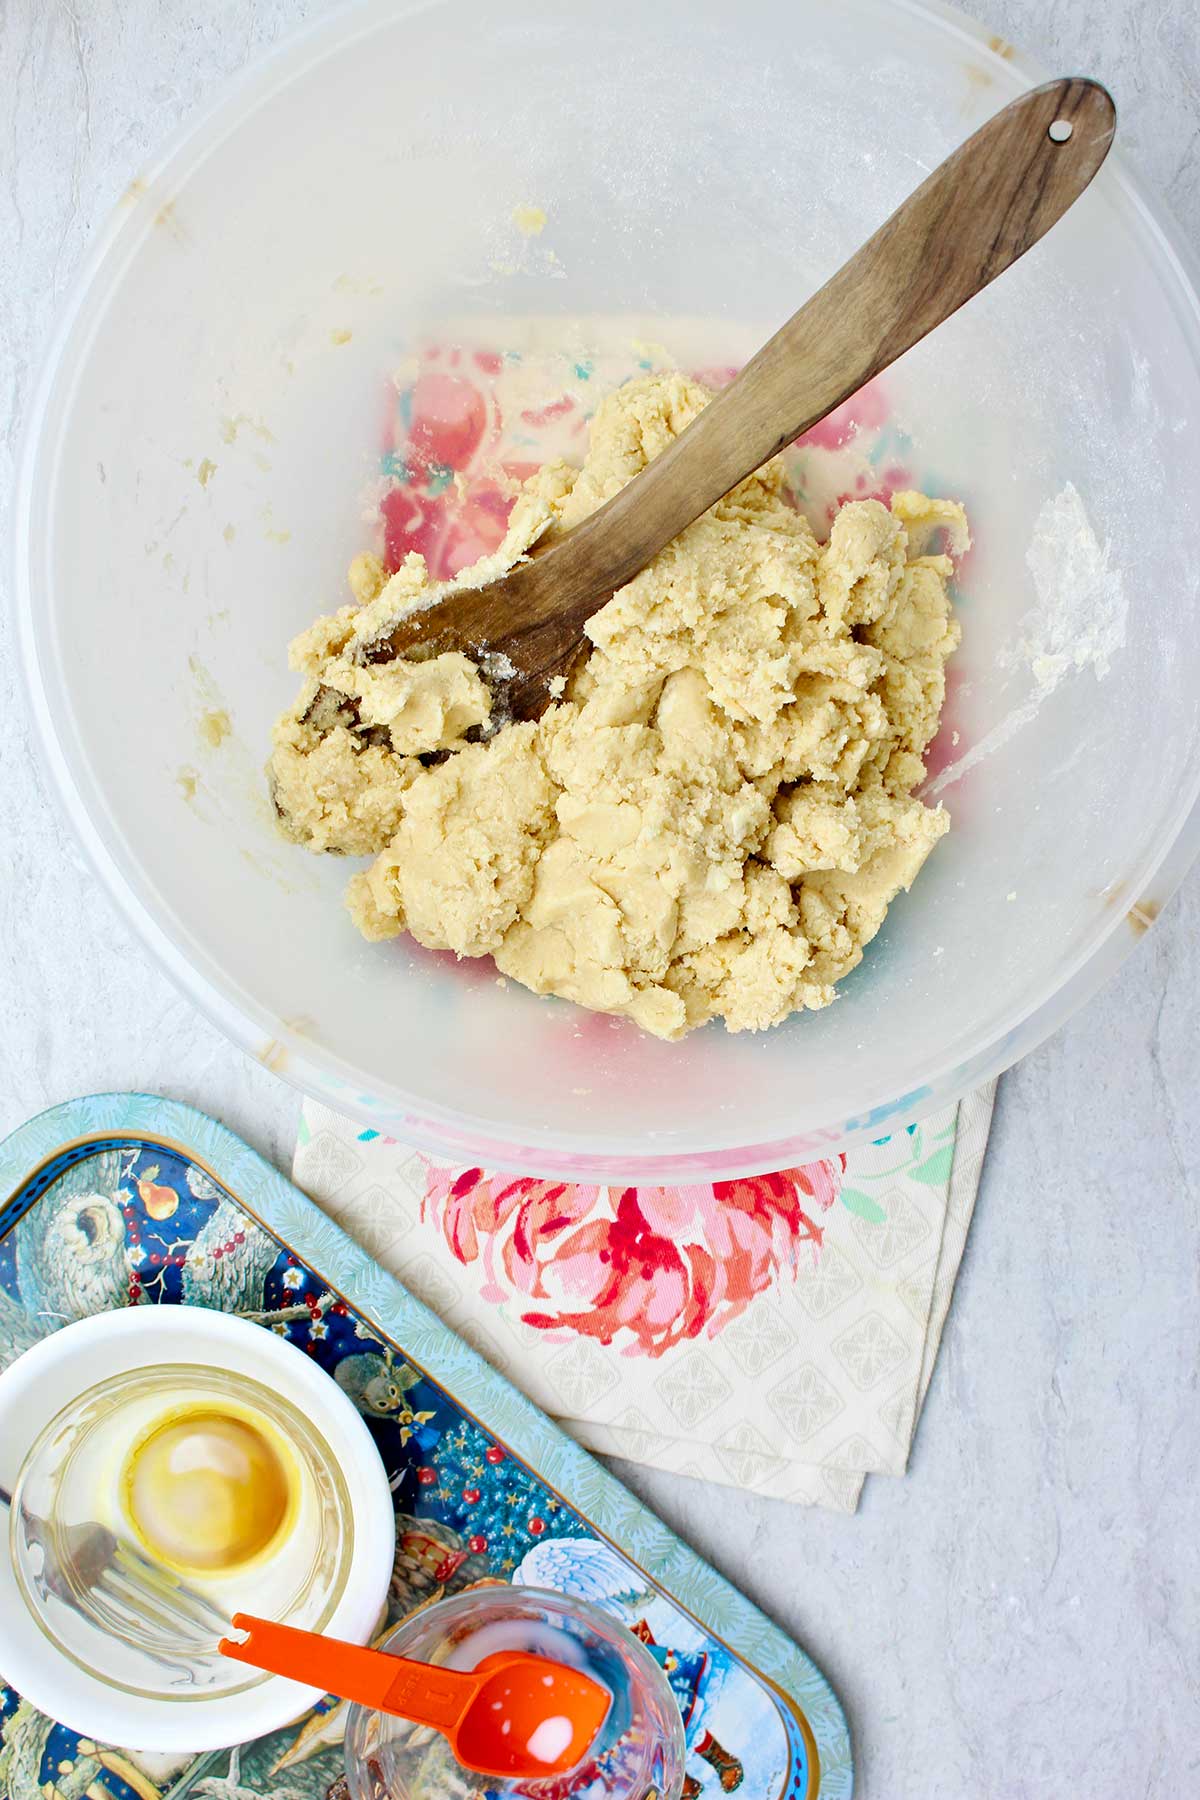 Bowl of sugar cookie dough with wooden spoon resting in it with tray of other ingredients near by.